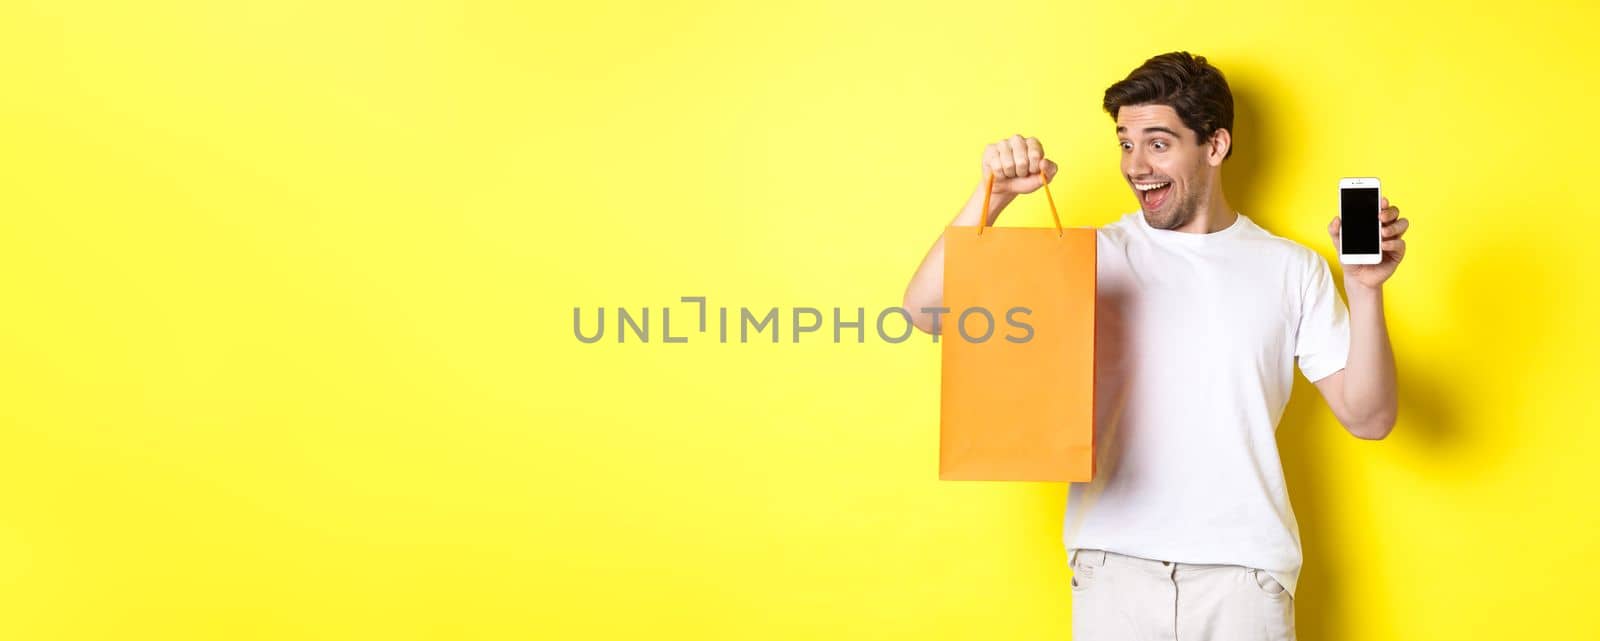 Concept of discounts, online banking and cashback. Happy guy buy something in store and looking at shopping bag, showing mobile phone screen, yellow background.